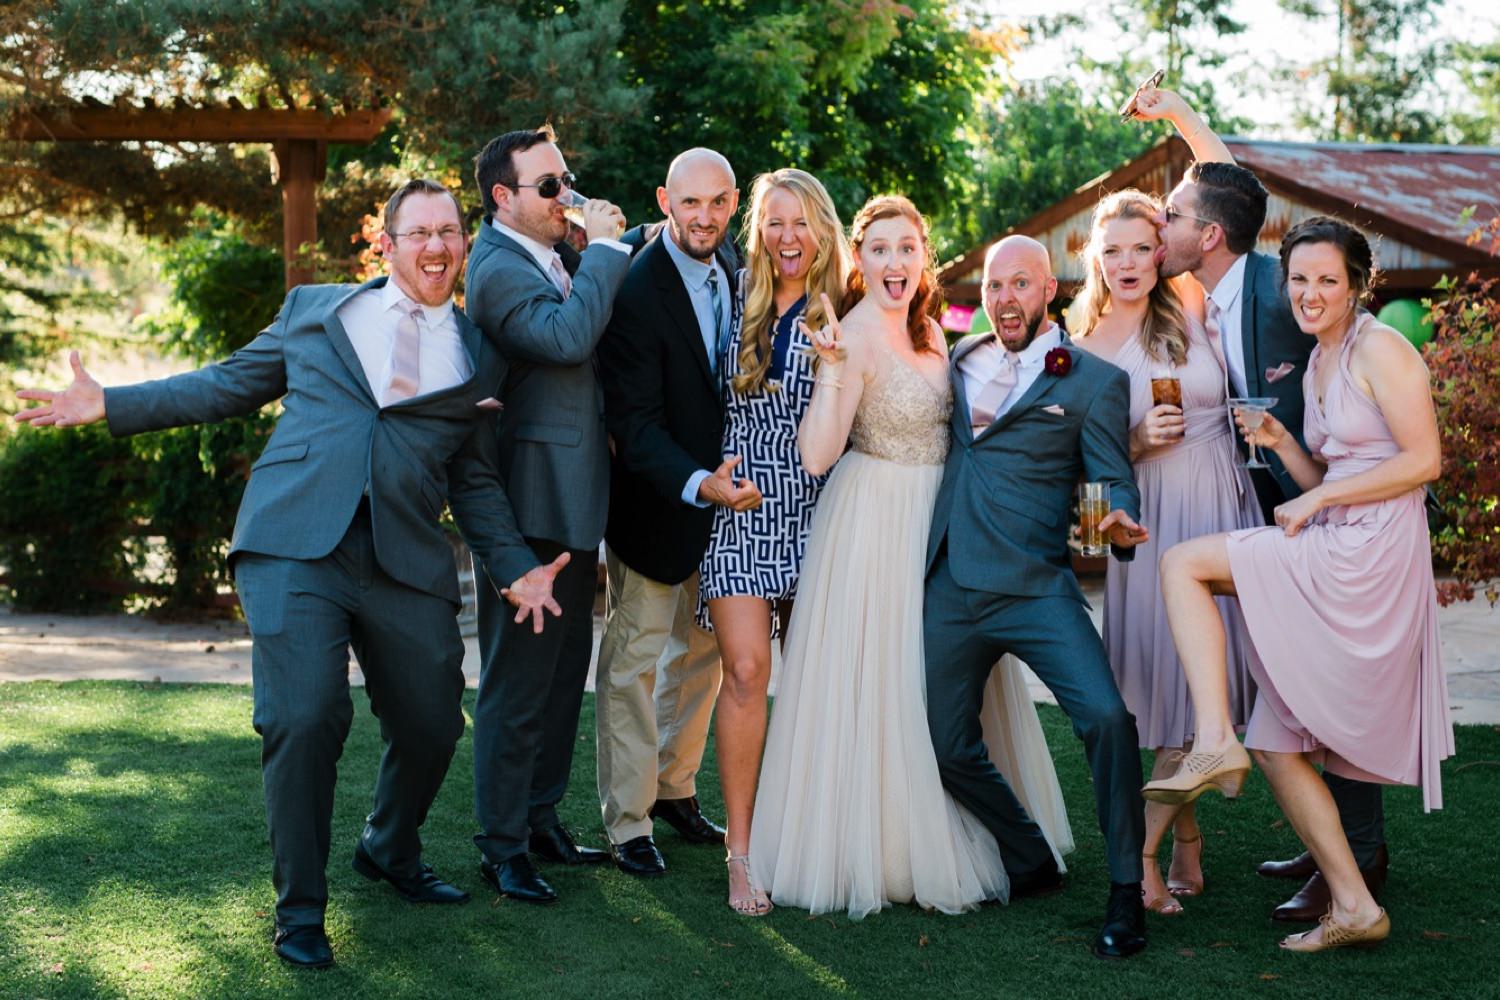 silly group picture at Sova Gardens wedding